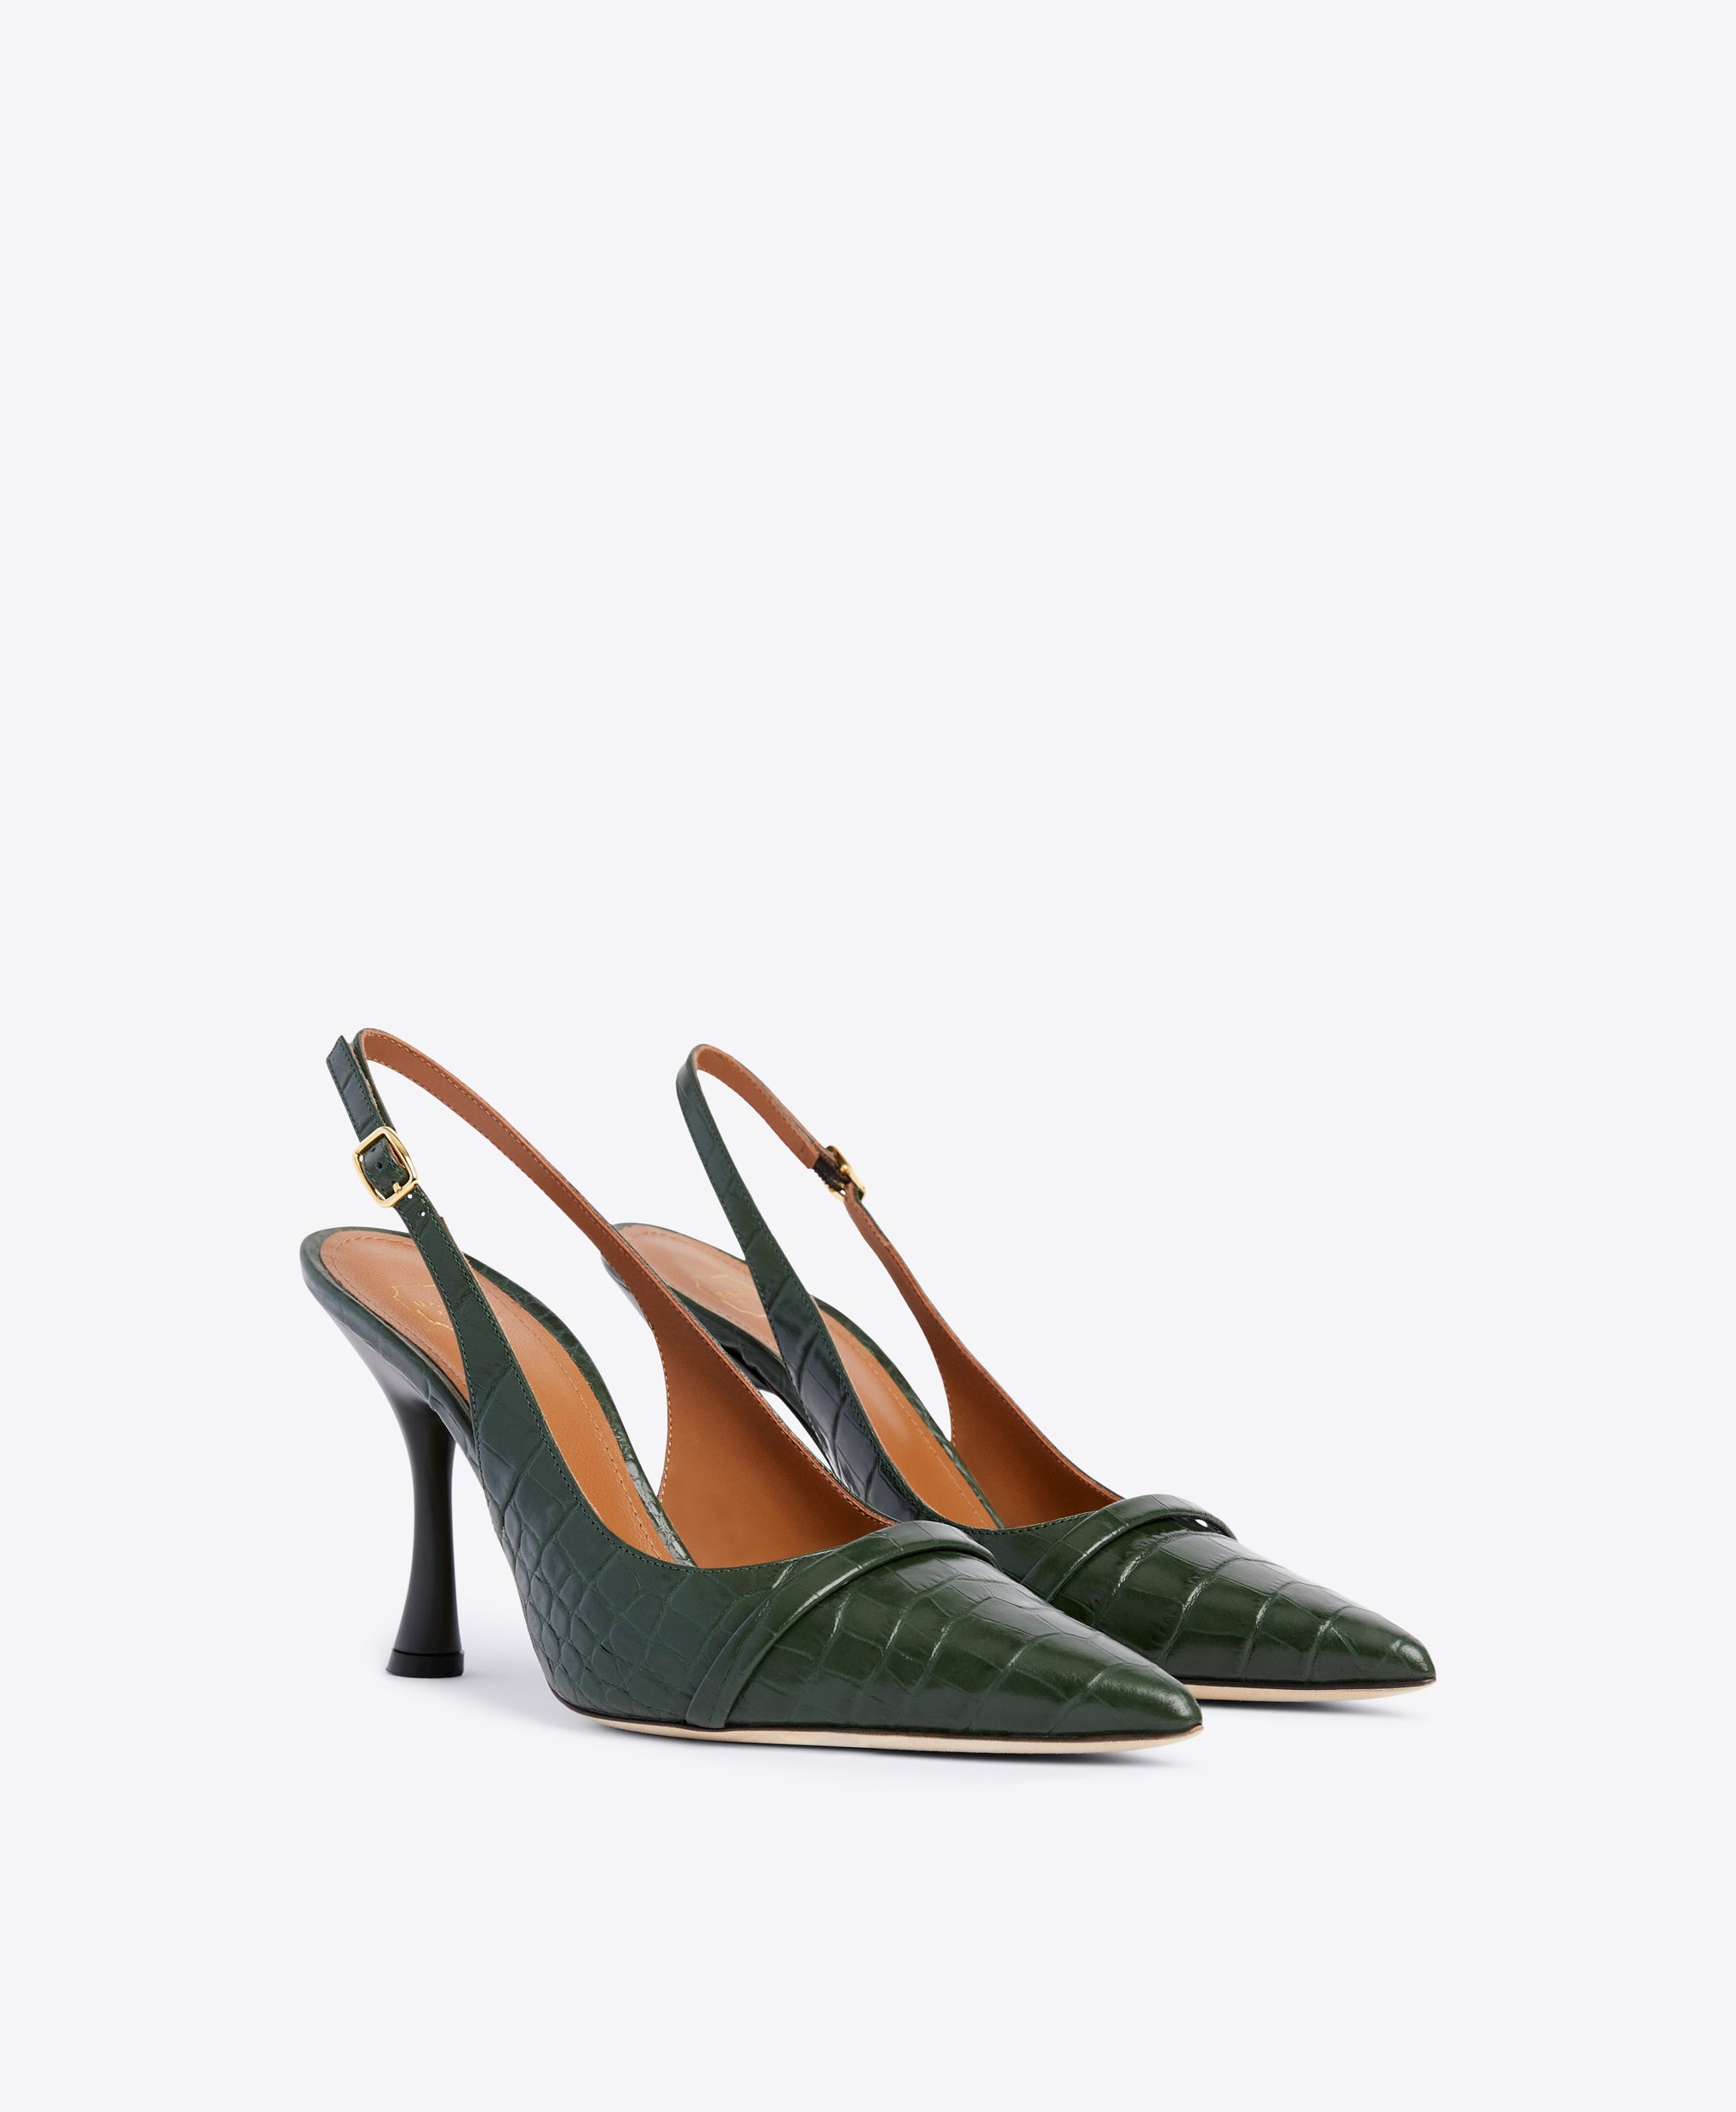 Pine Green Embossed Leather Slingbacks - Pointed Toe with Strap | Malone Souliers